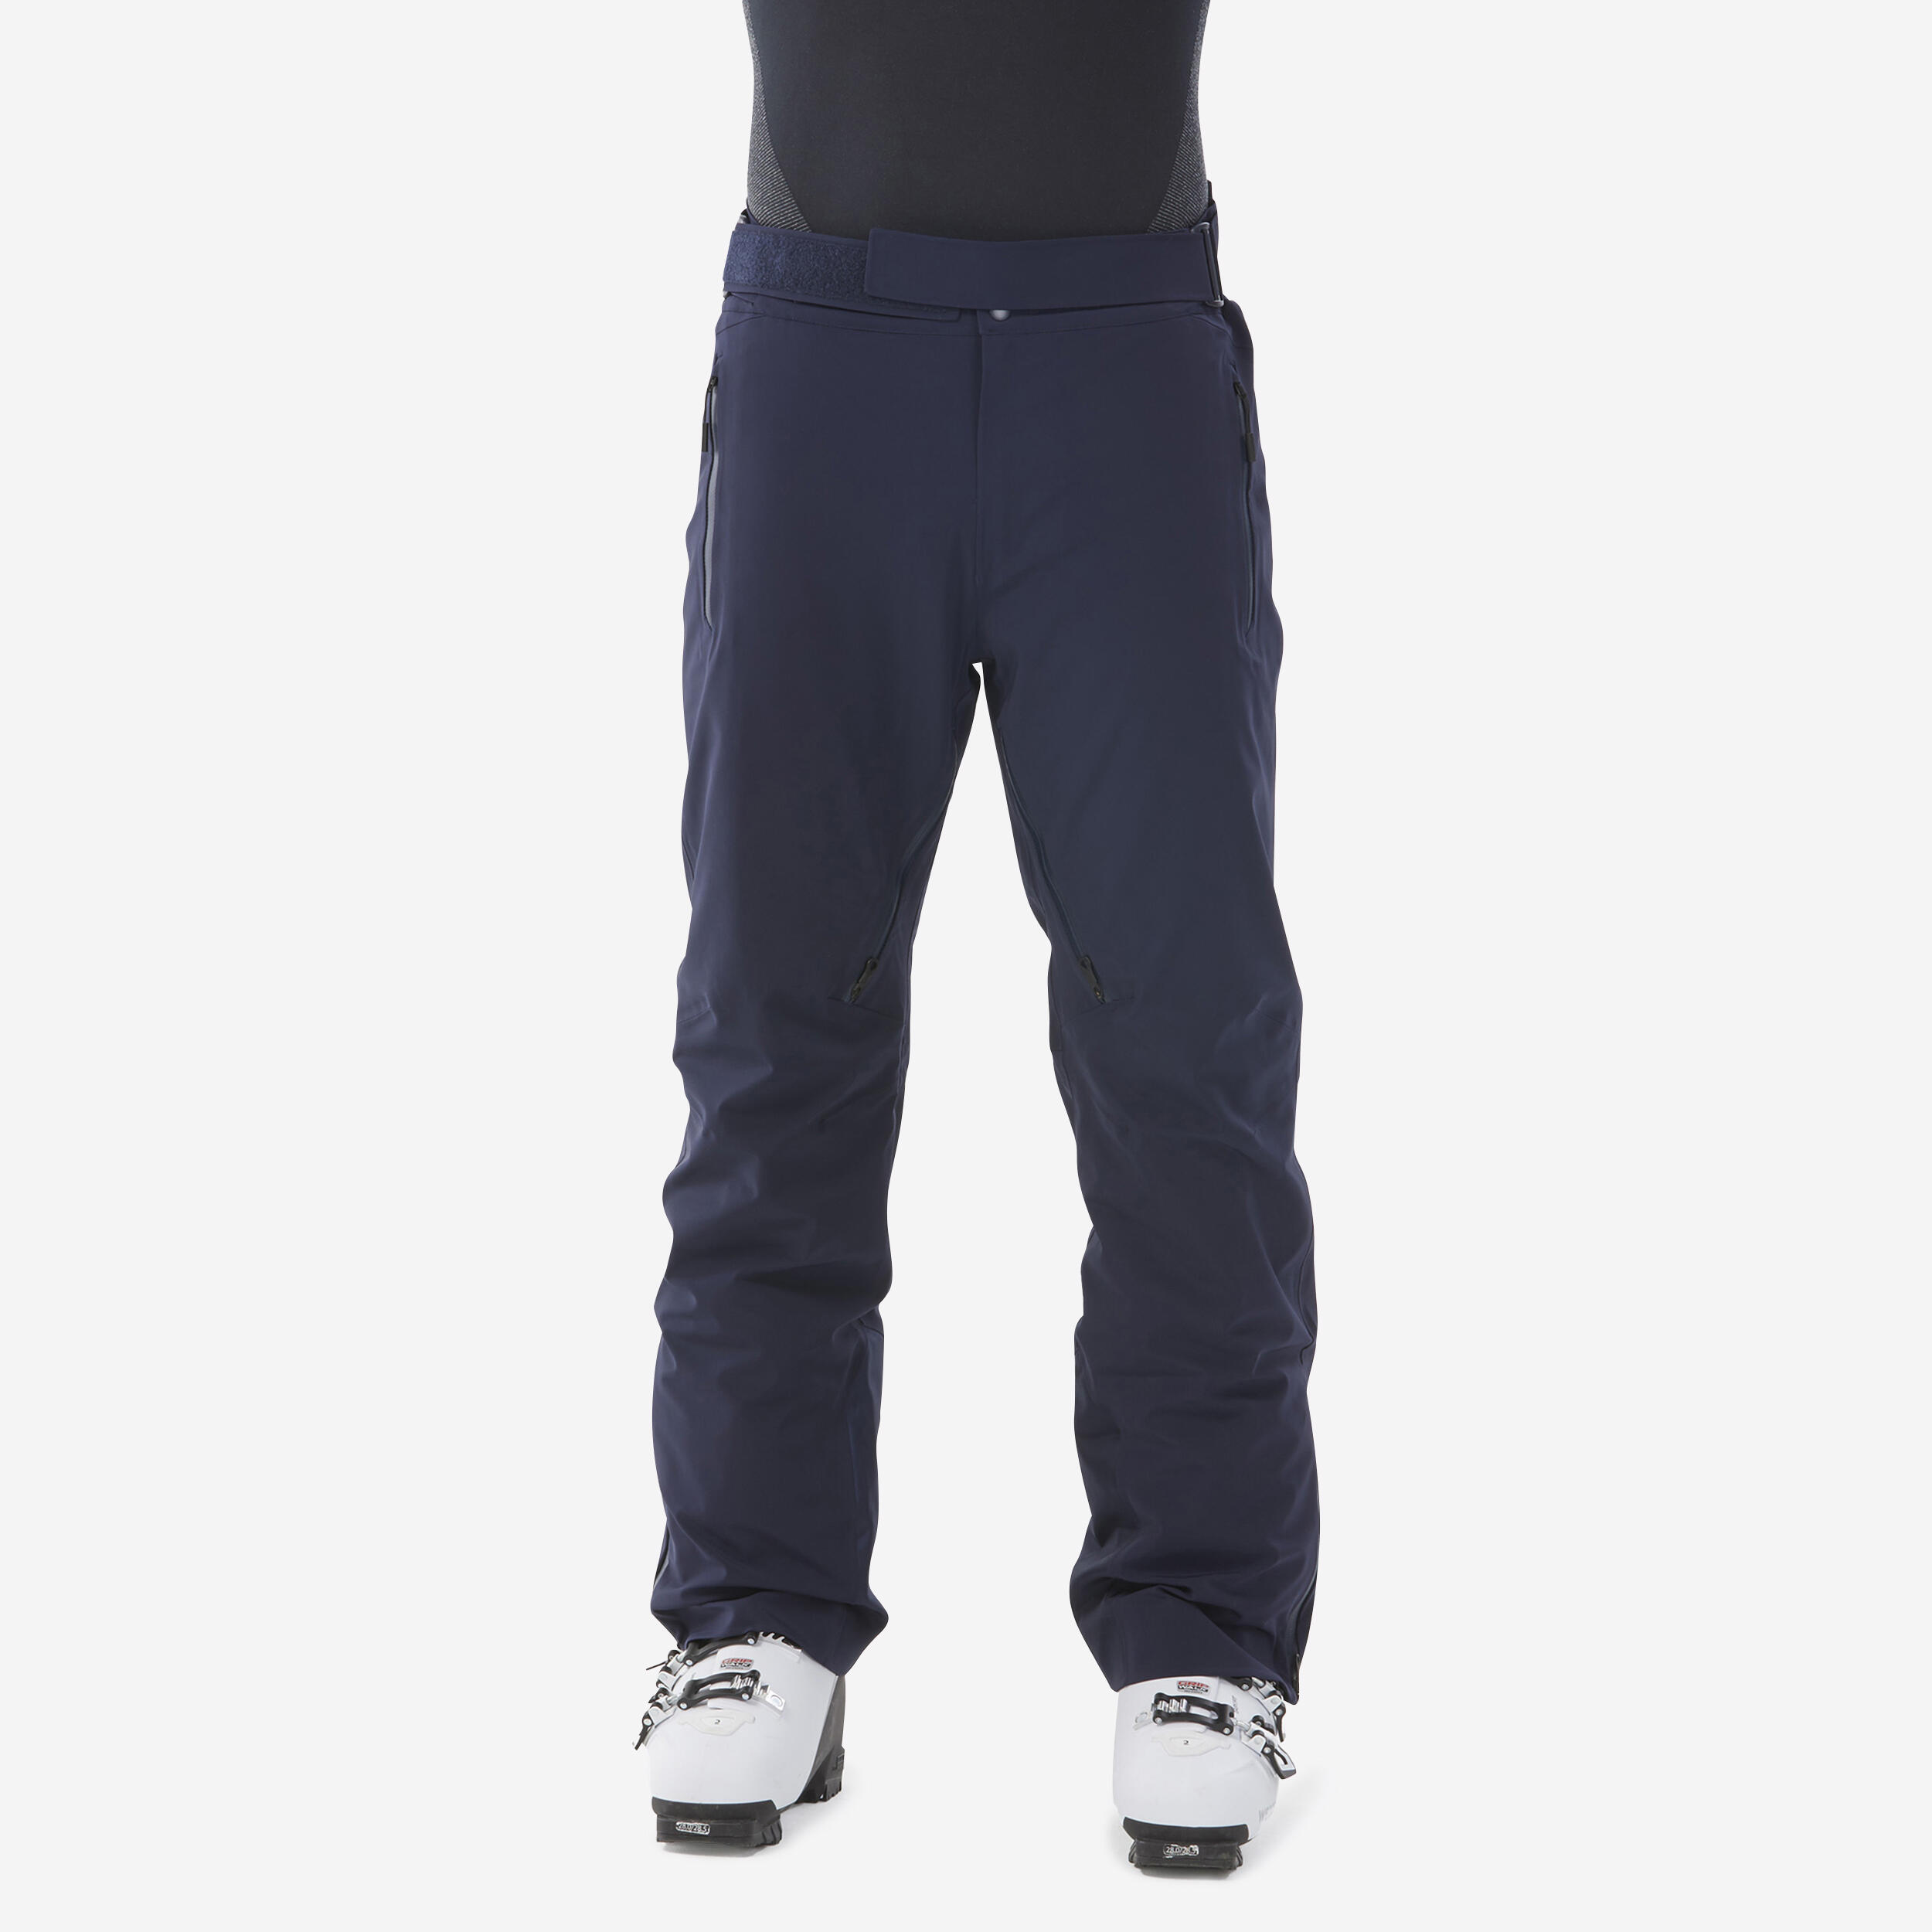 Wedze Men’s Breathable Ski Trousers That Provide Freedom Of Movement 900 - Black